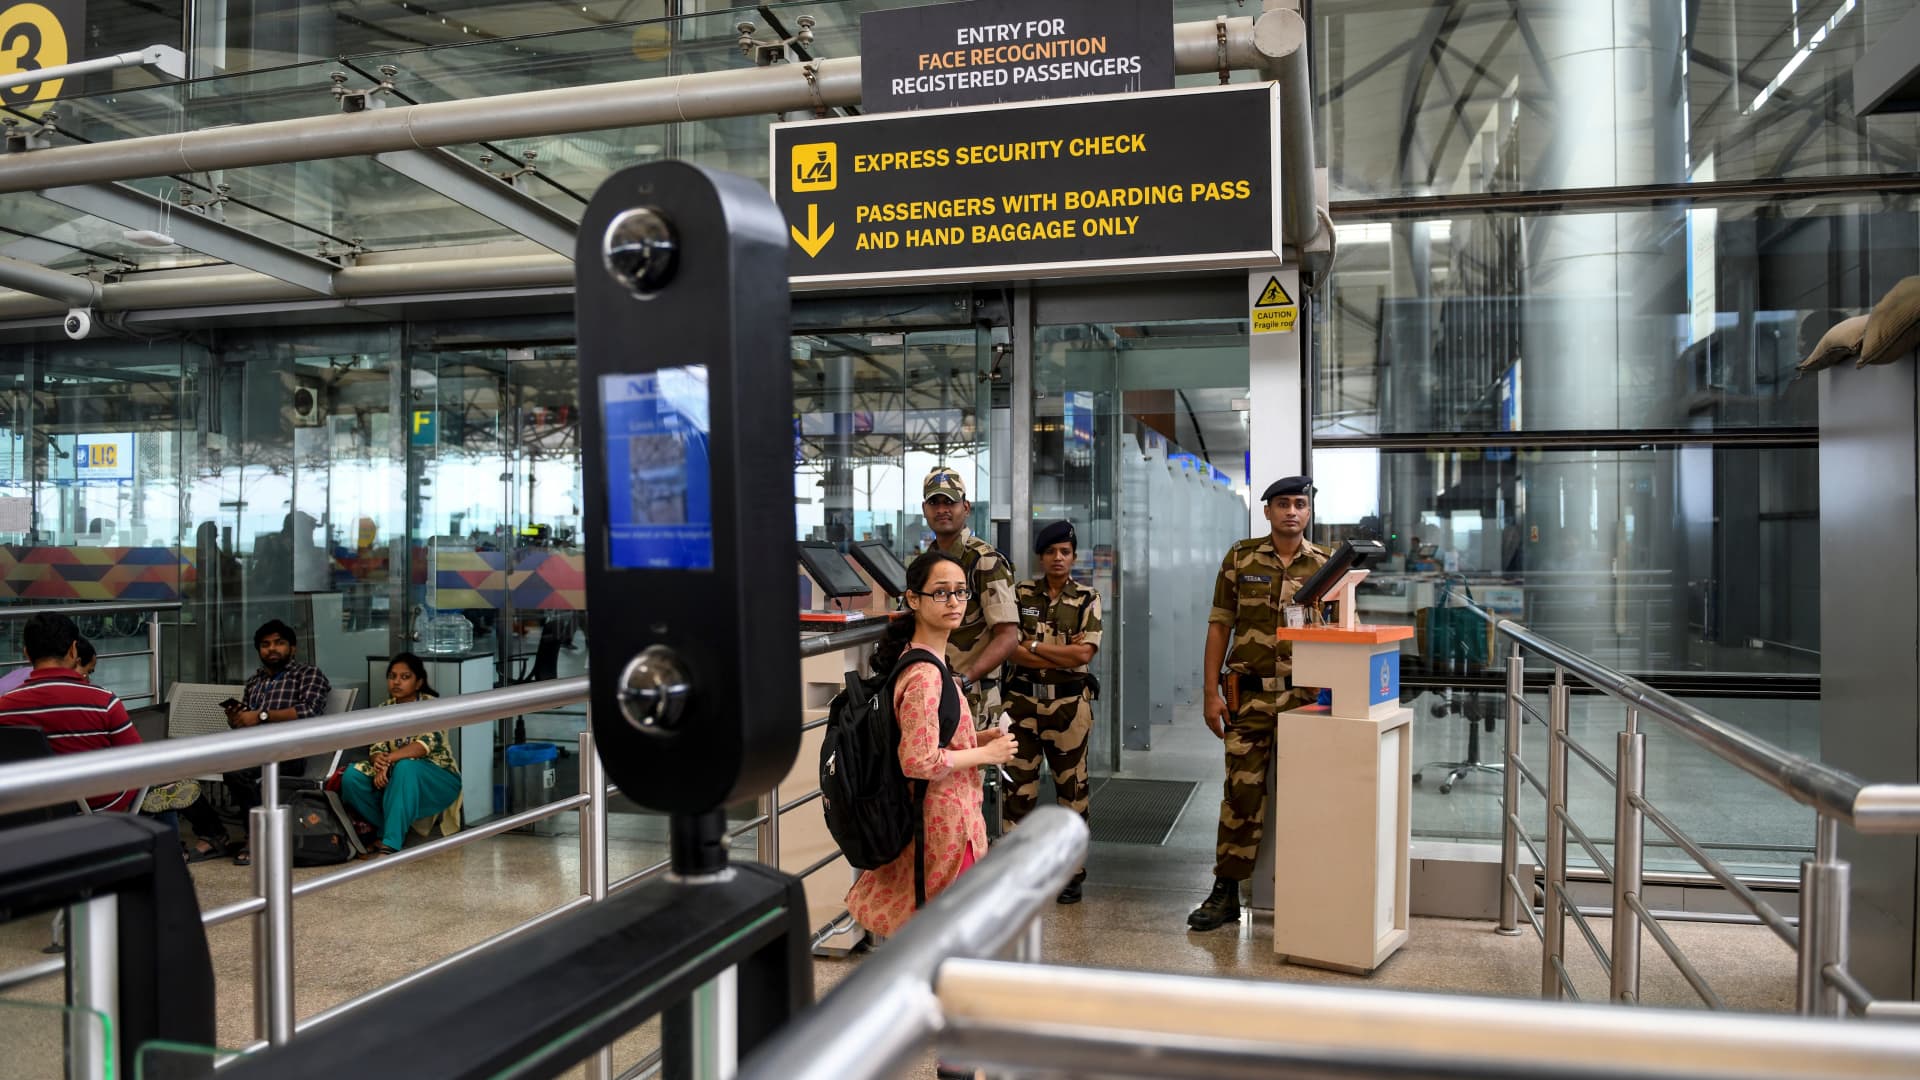 Rajiv Gandhi International Airport ranked as the No. 2 on-time airport in the world, according to Cirium.